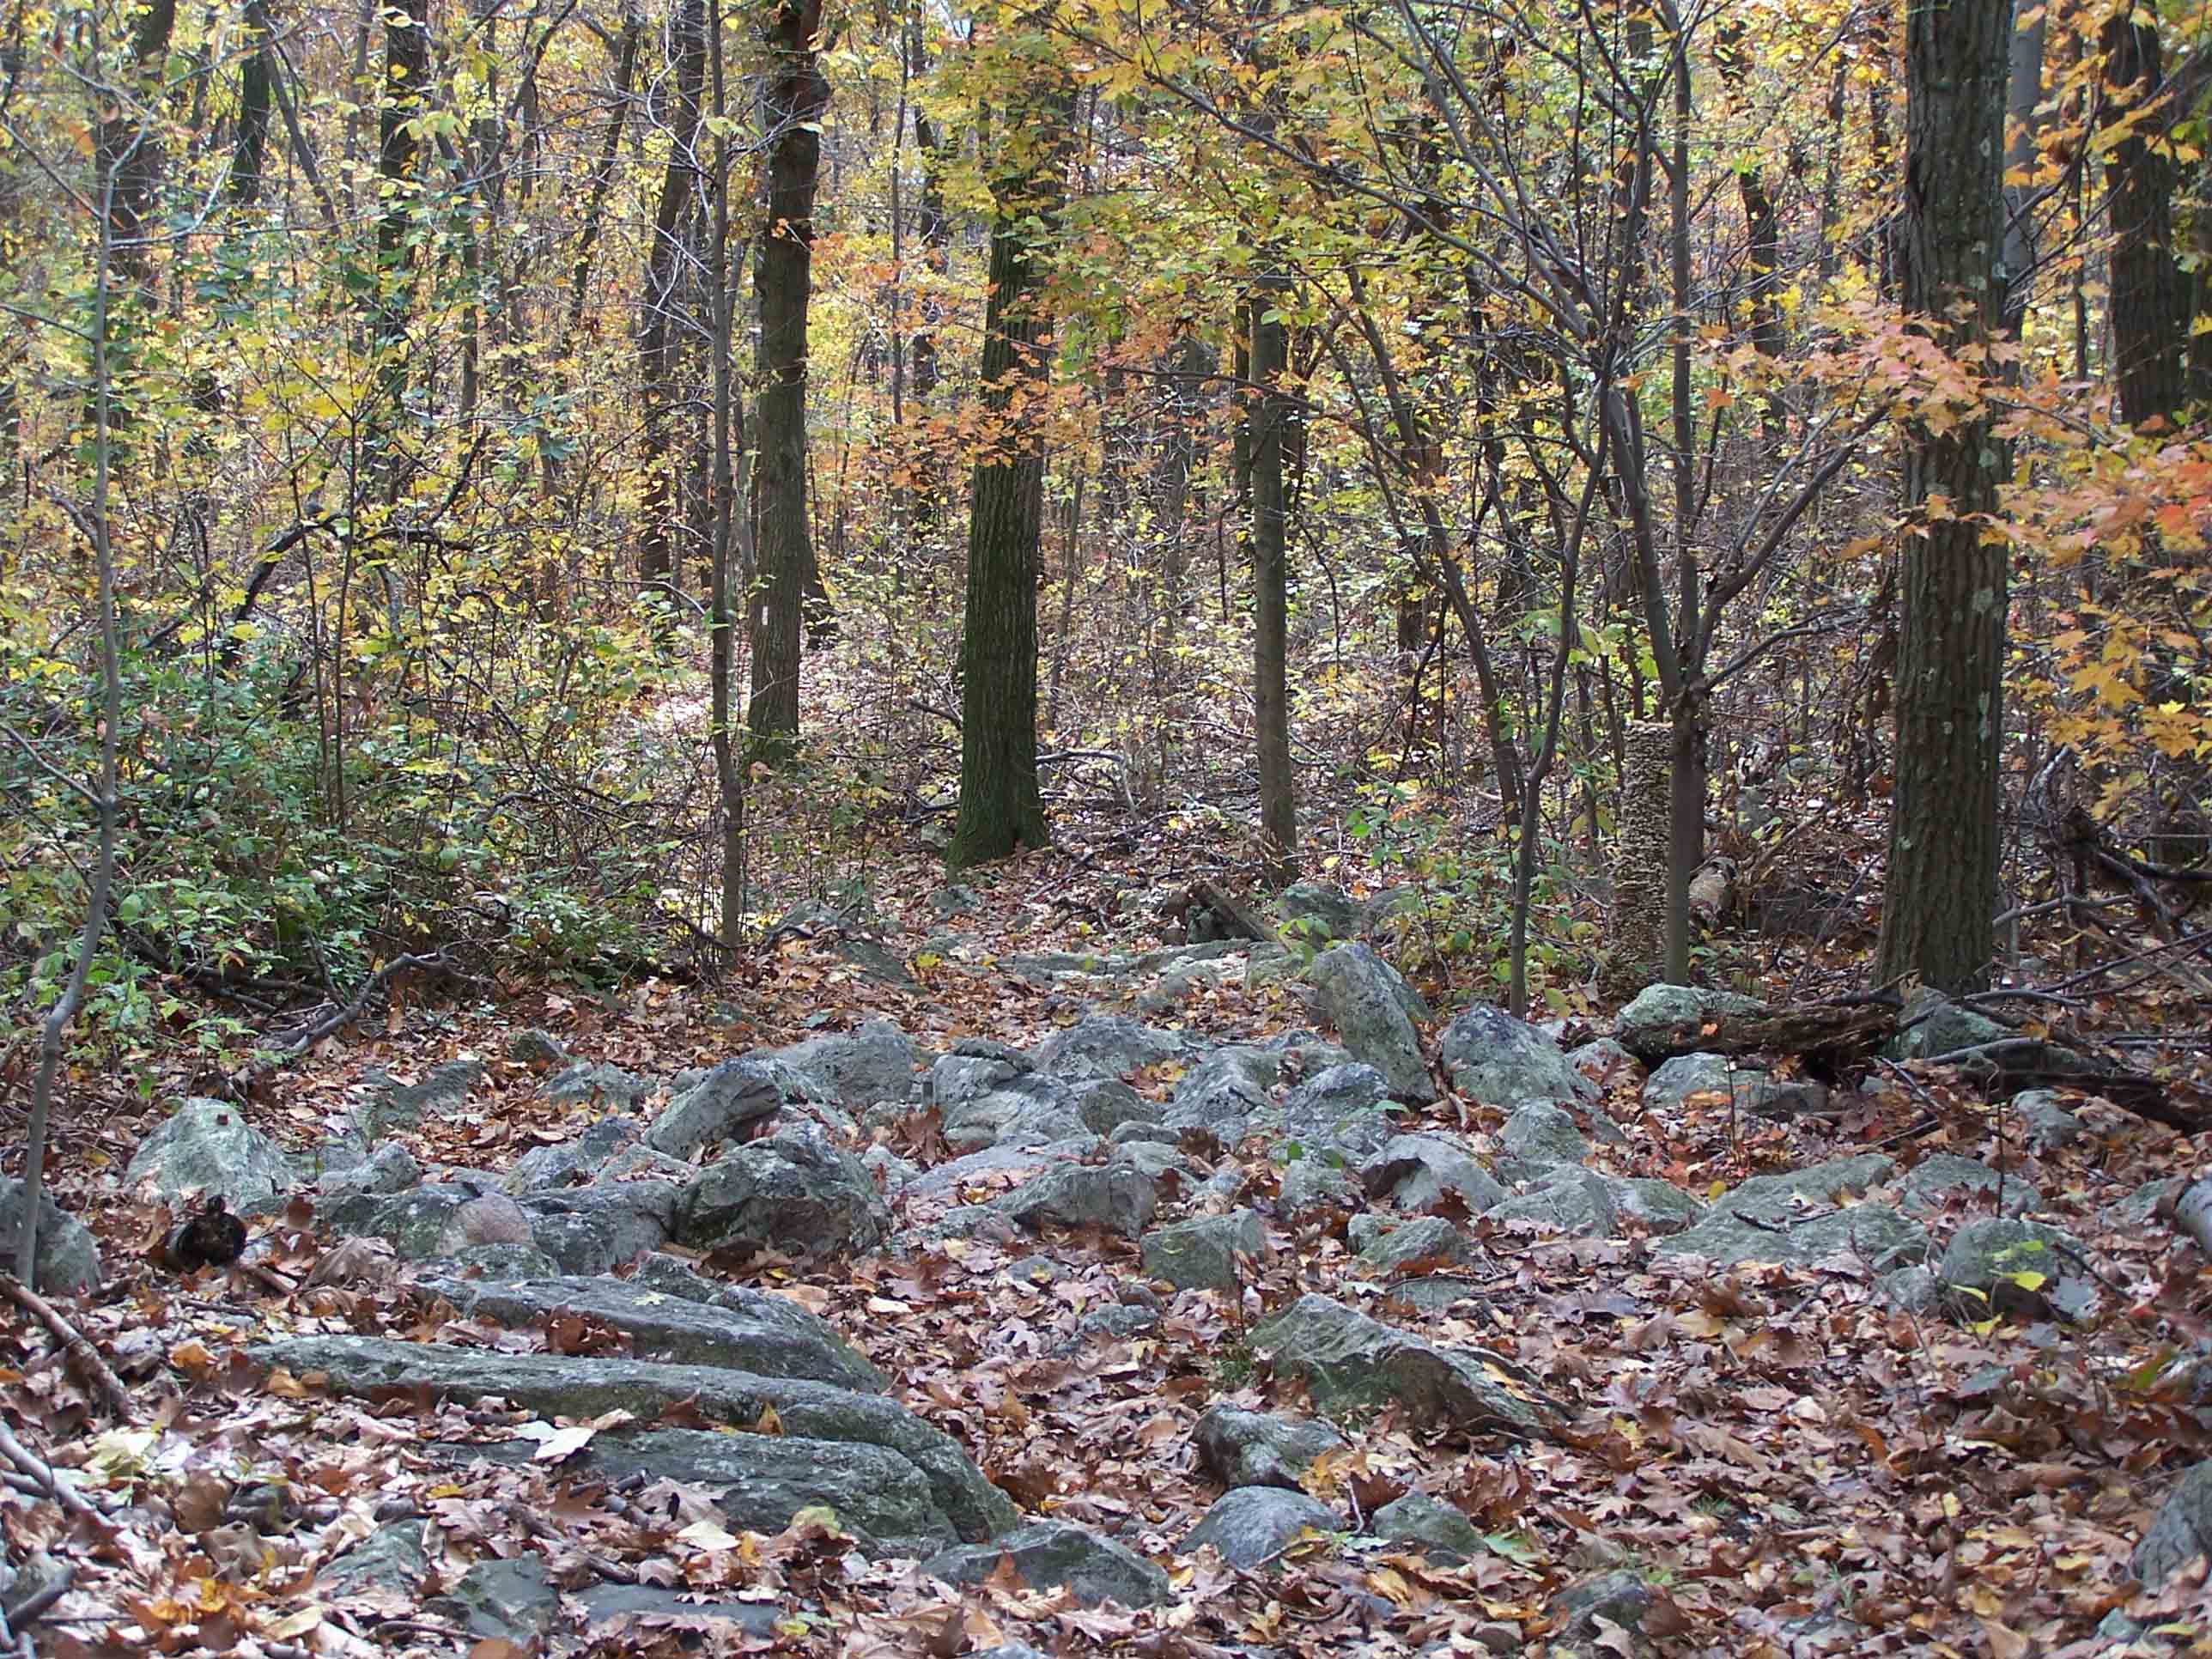 VERY rocky trail south of Allentown Shelter. Courtesy at@rohland.org